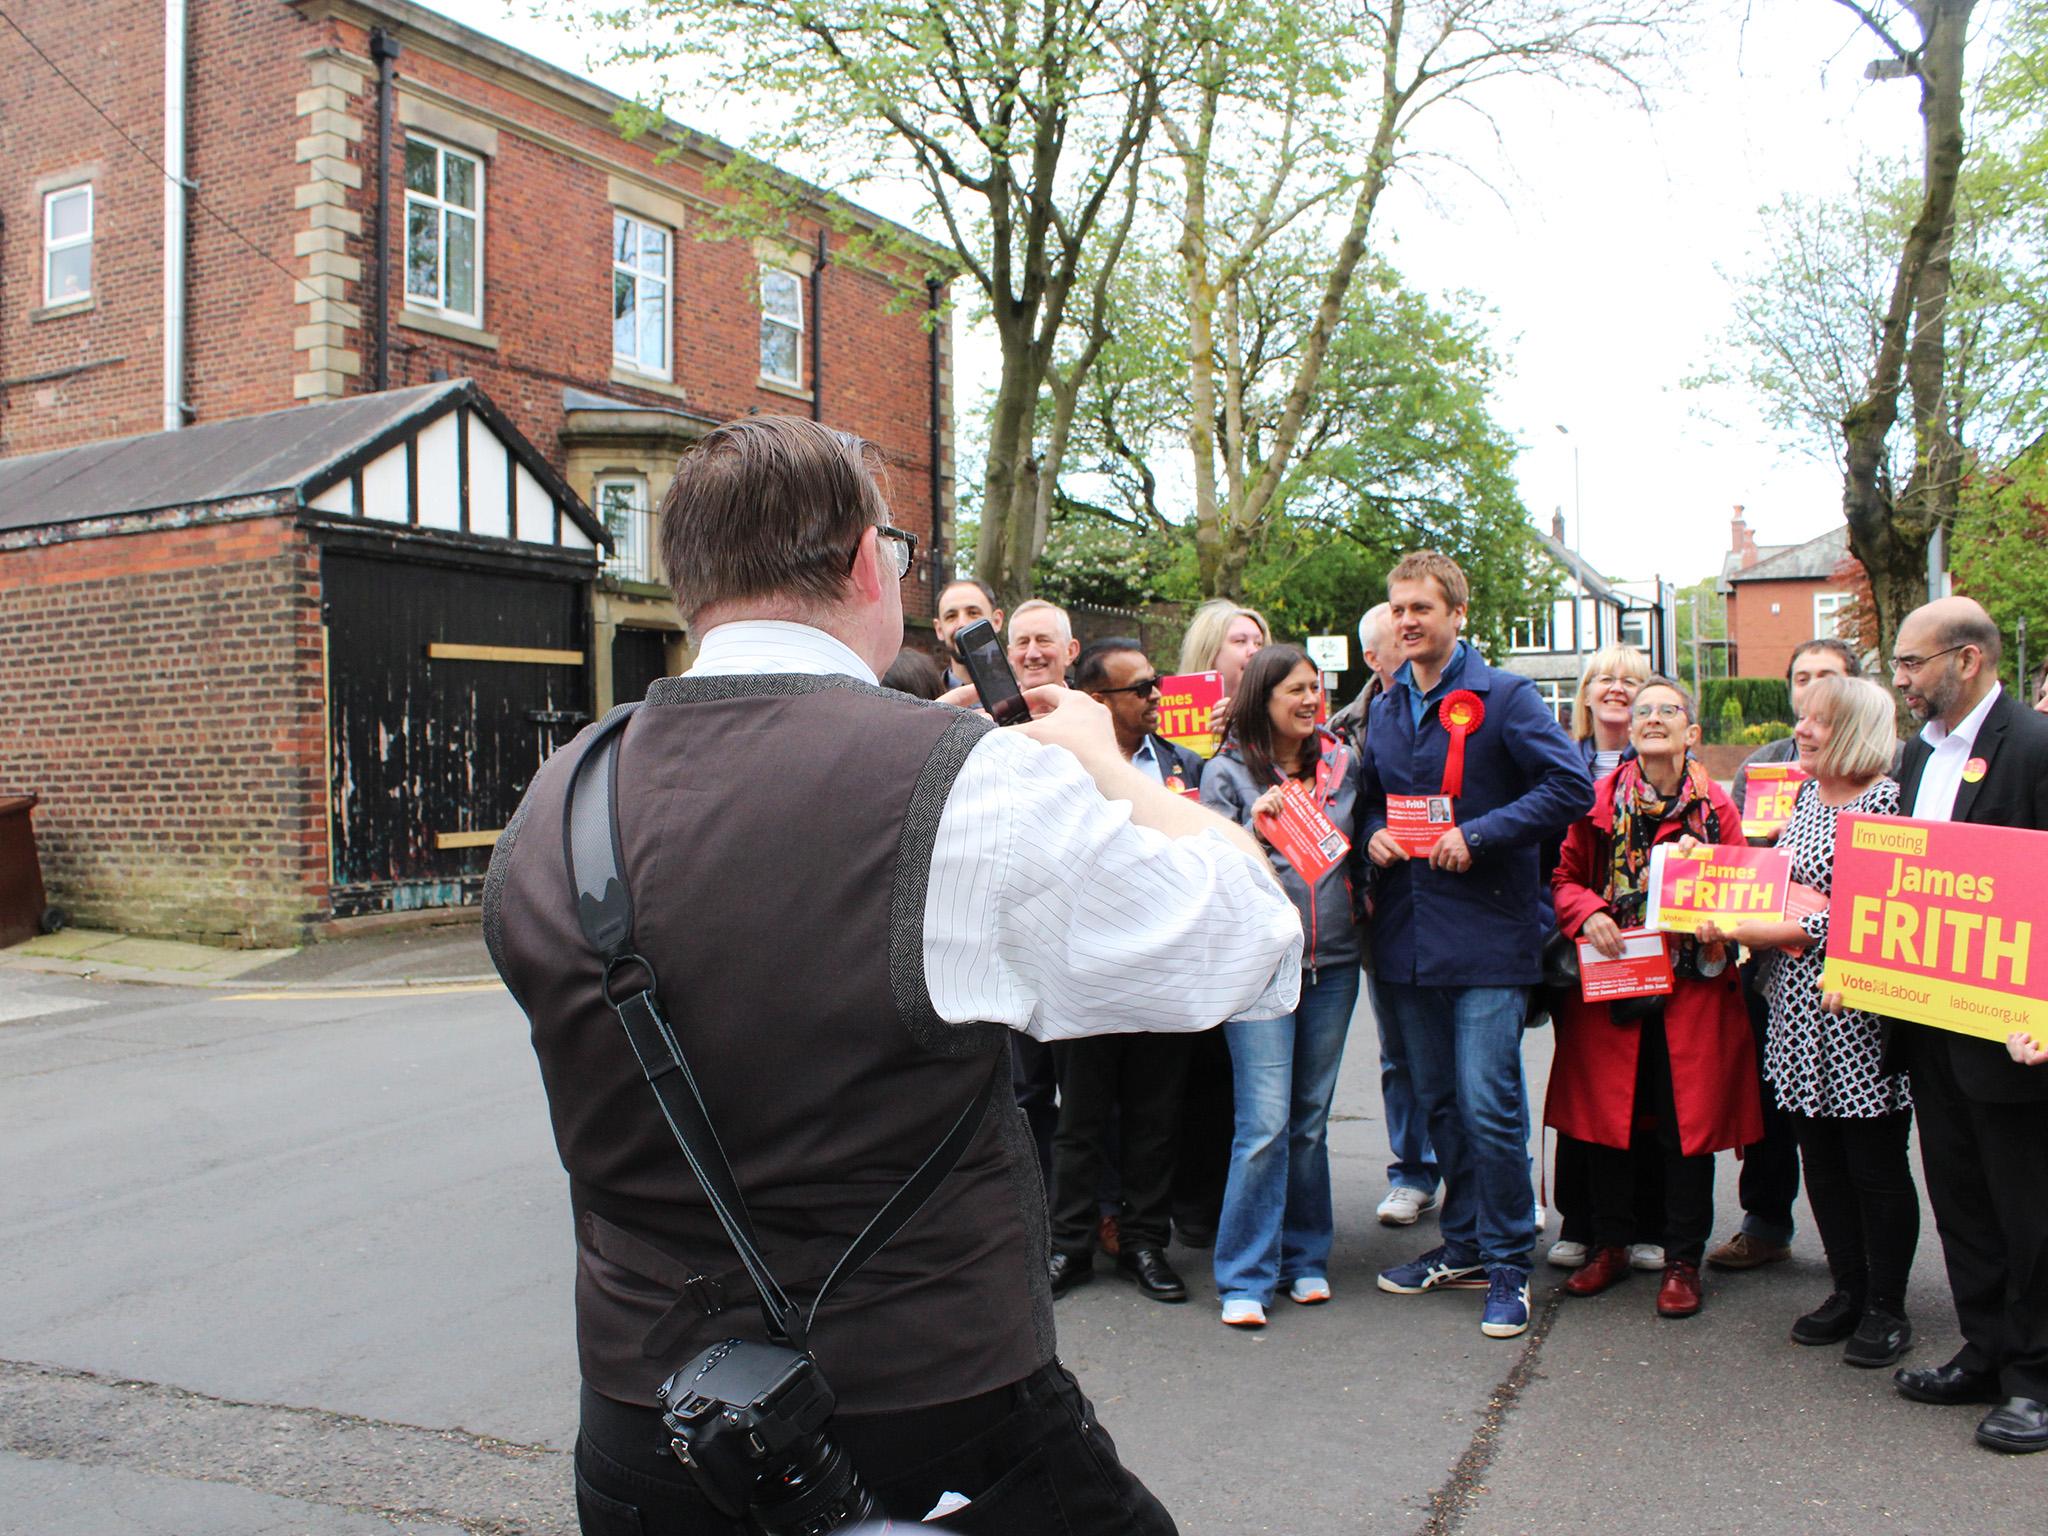 &#13;
Labour campaigners pose for photographs after a leafleting session in Bury &#13;